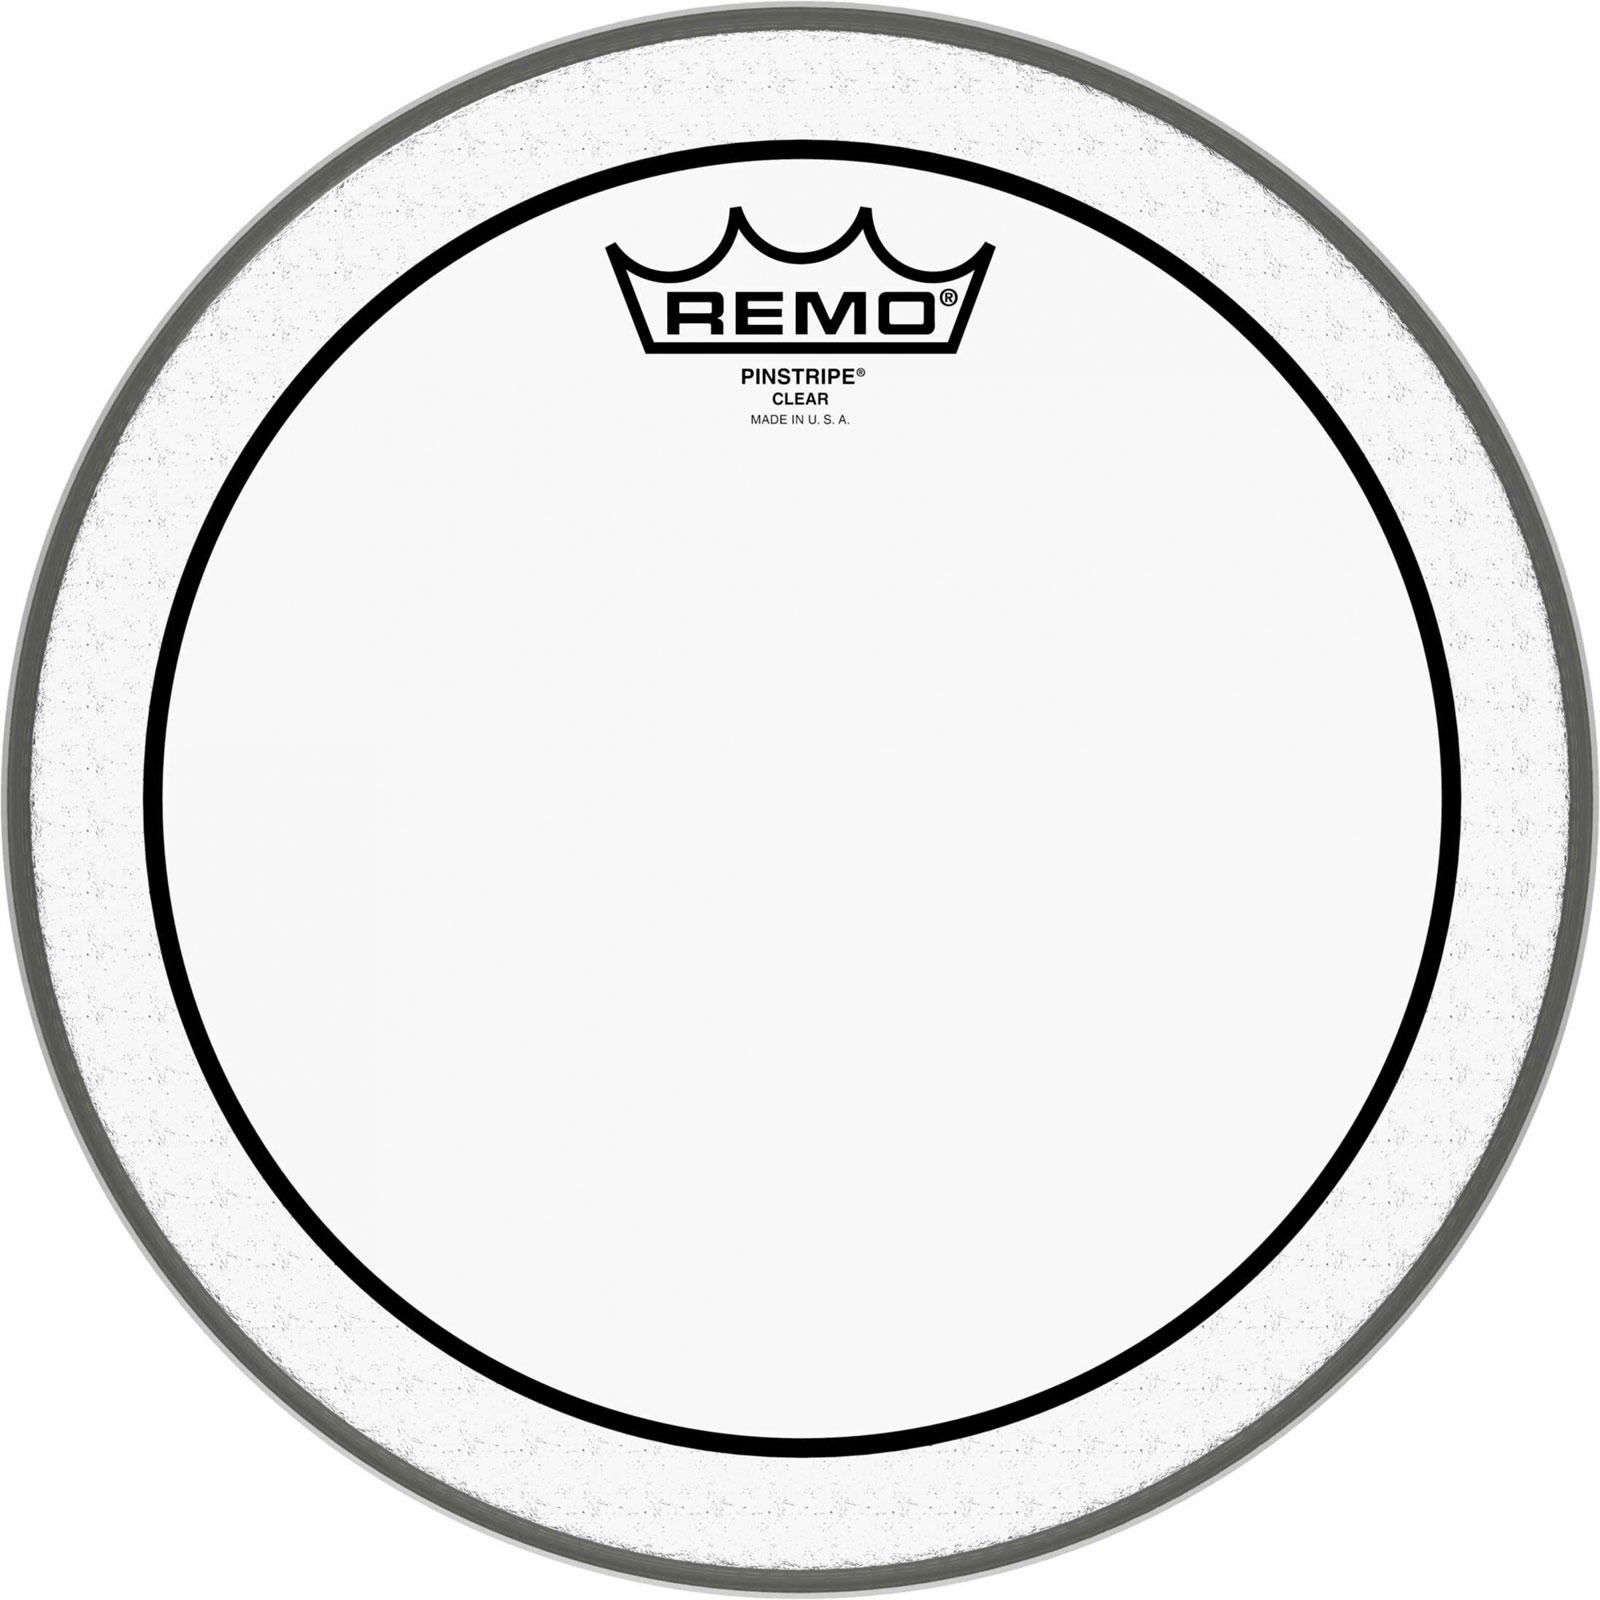 REMO PS-0310-00 - PINSTRIPE CLEAR 10